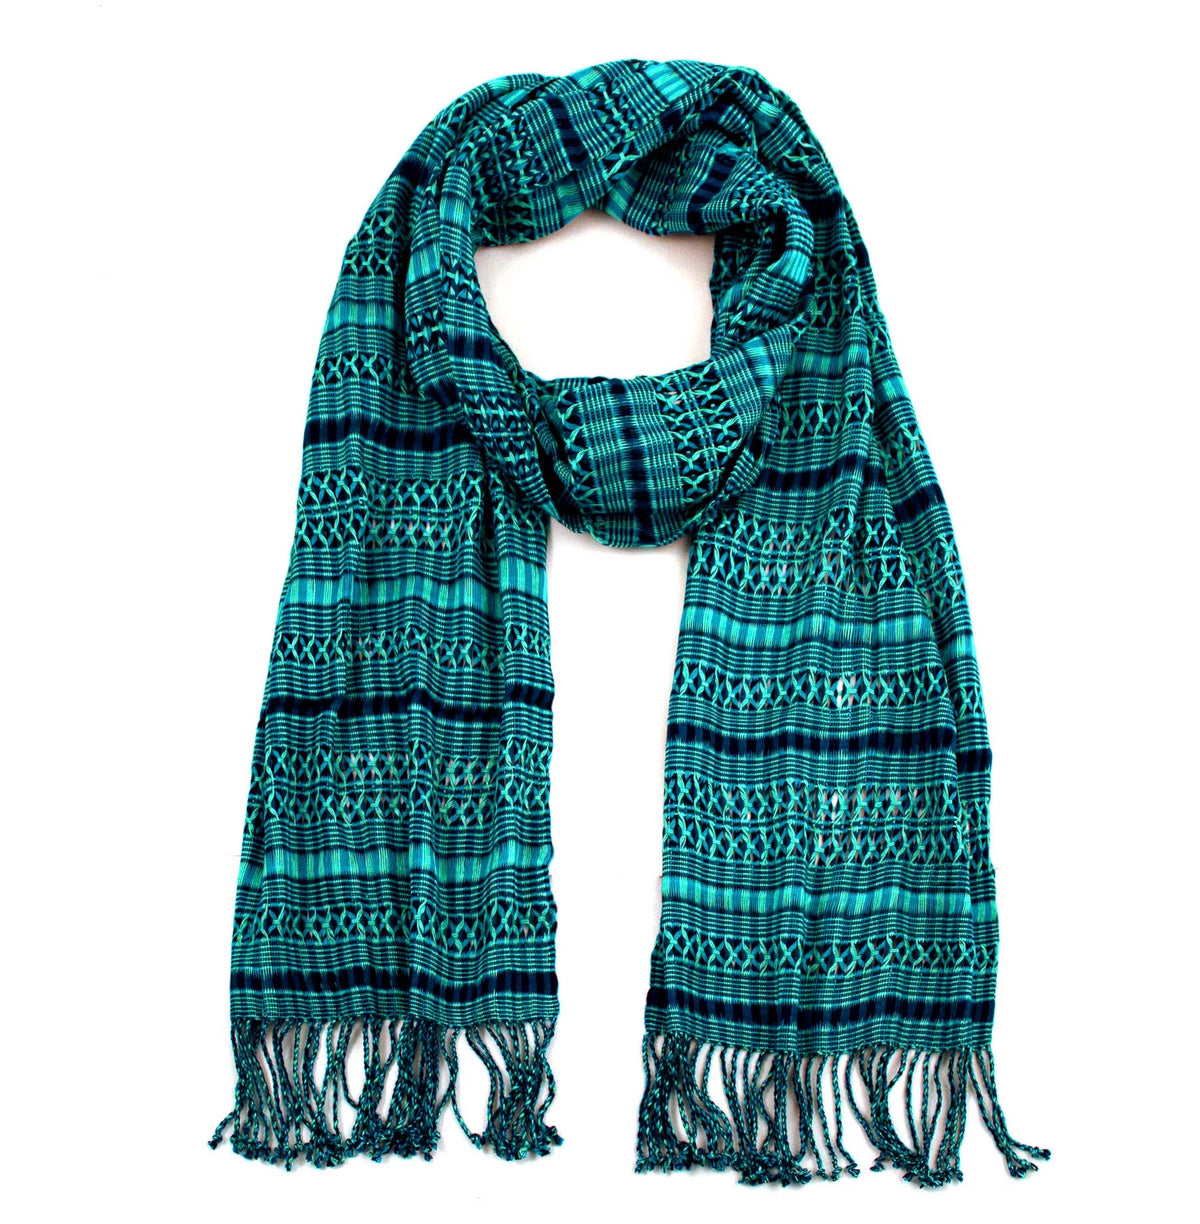 Linda Scarf in Teal, woven from rayon threads in teal and navy tones, with twisted fringe. The scarf is laid flat, wrapped with a loop on white background.